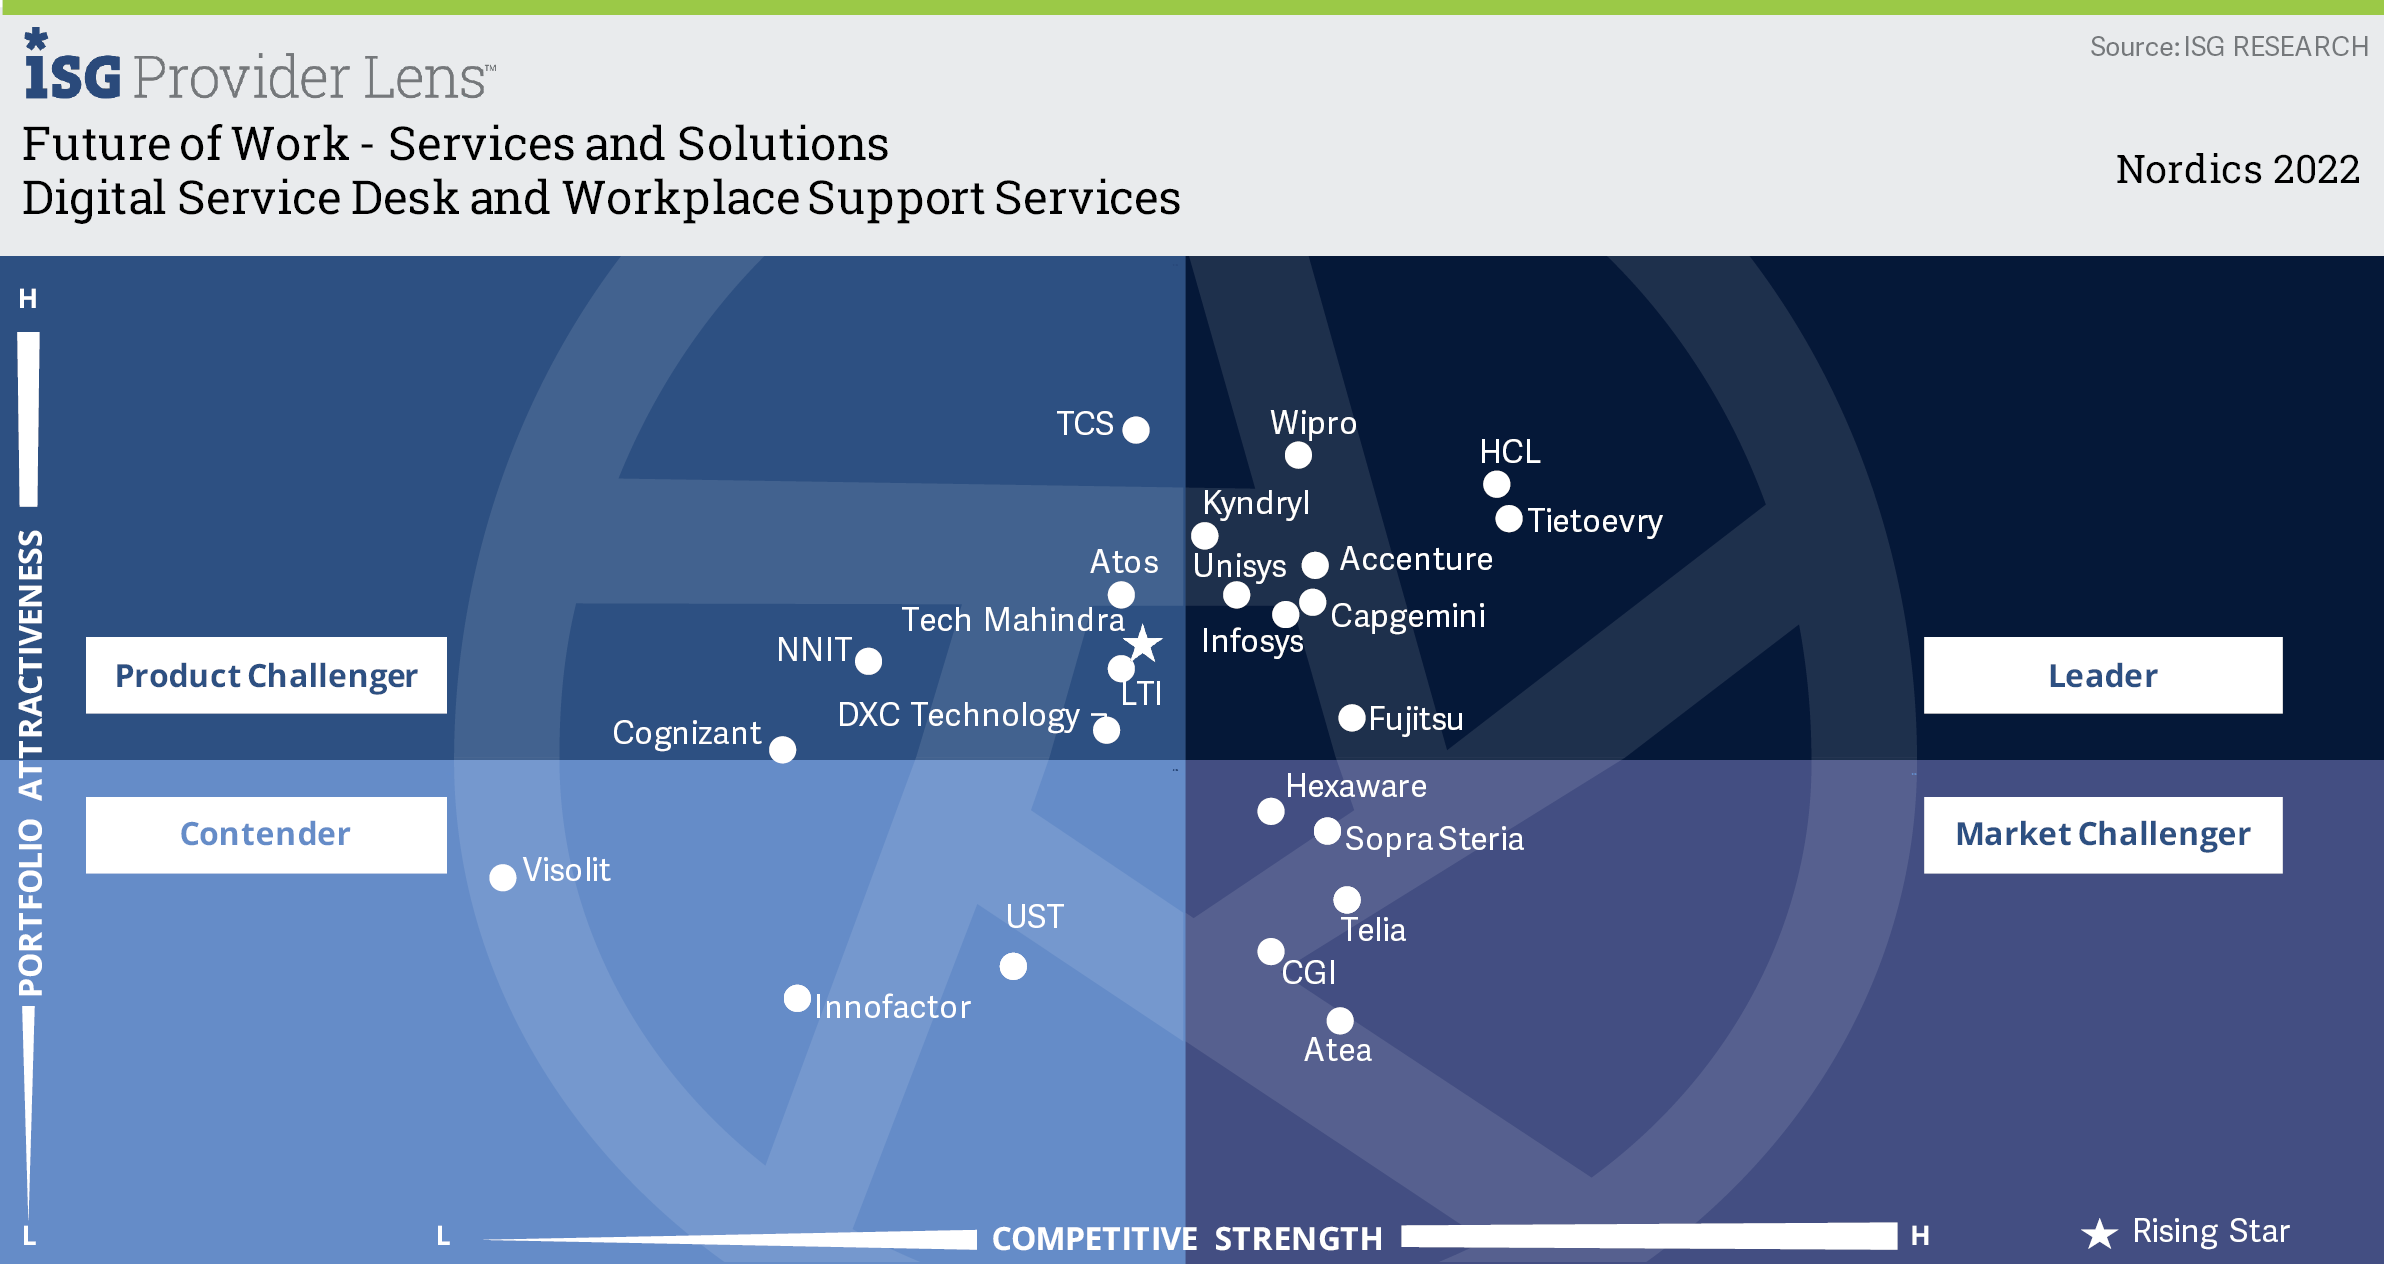  ISG Provider Lens™ 2022 – Future of Work - Services and Solutions 2022